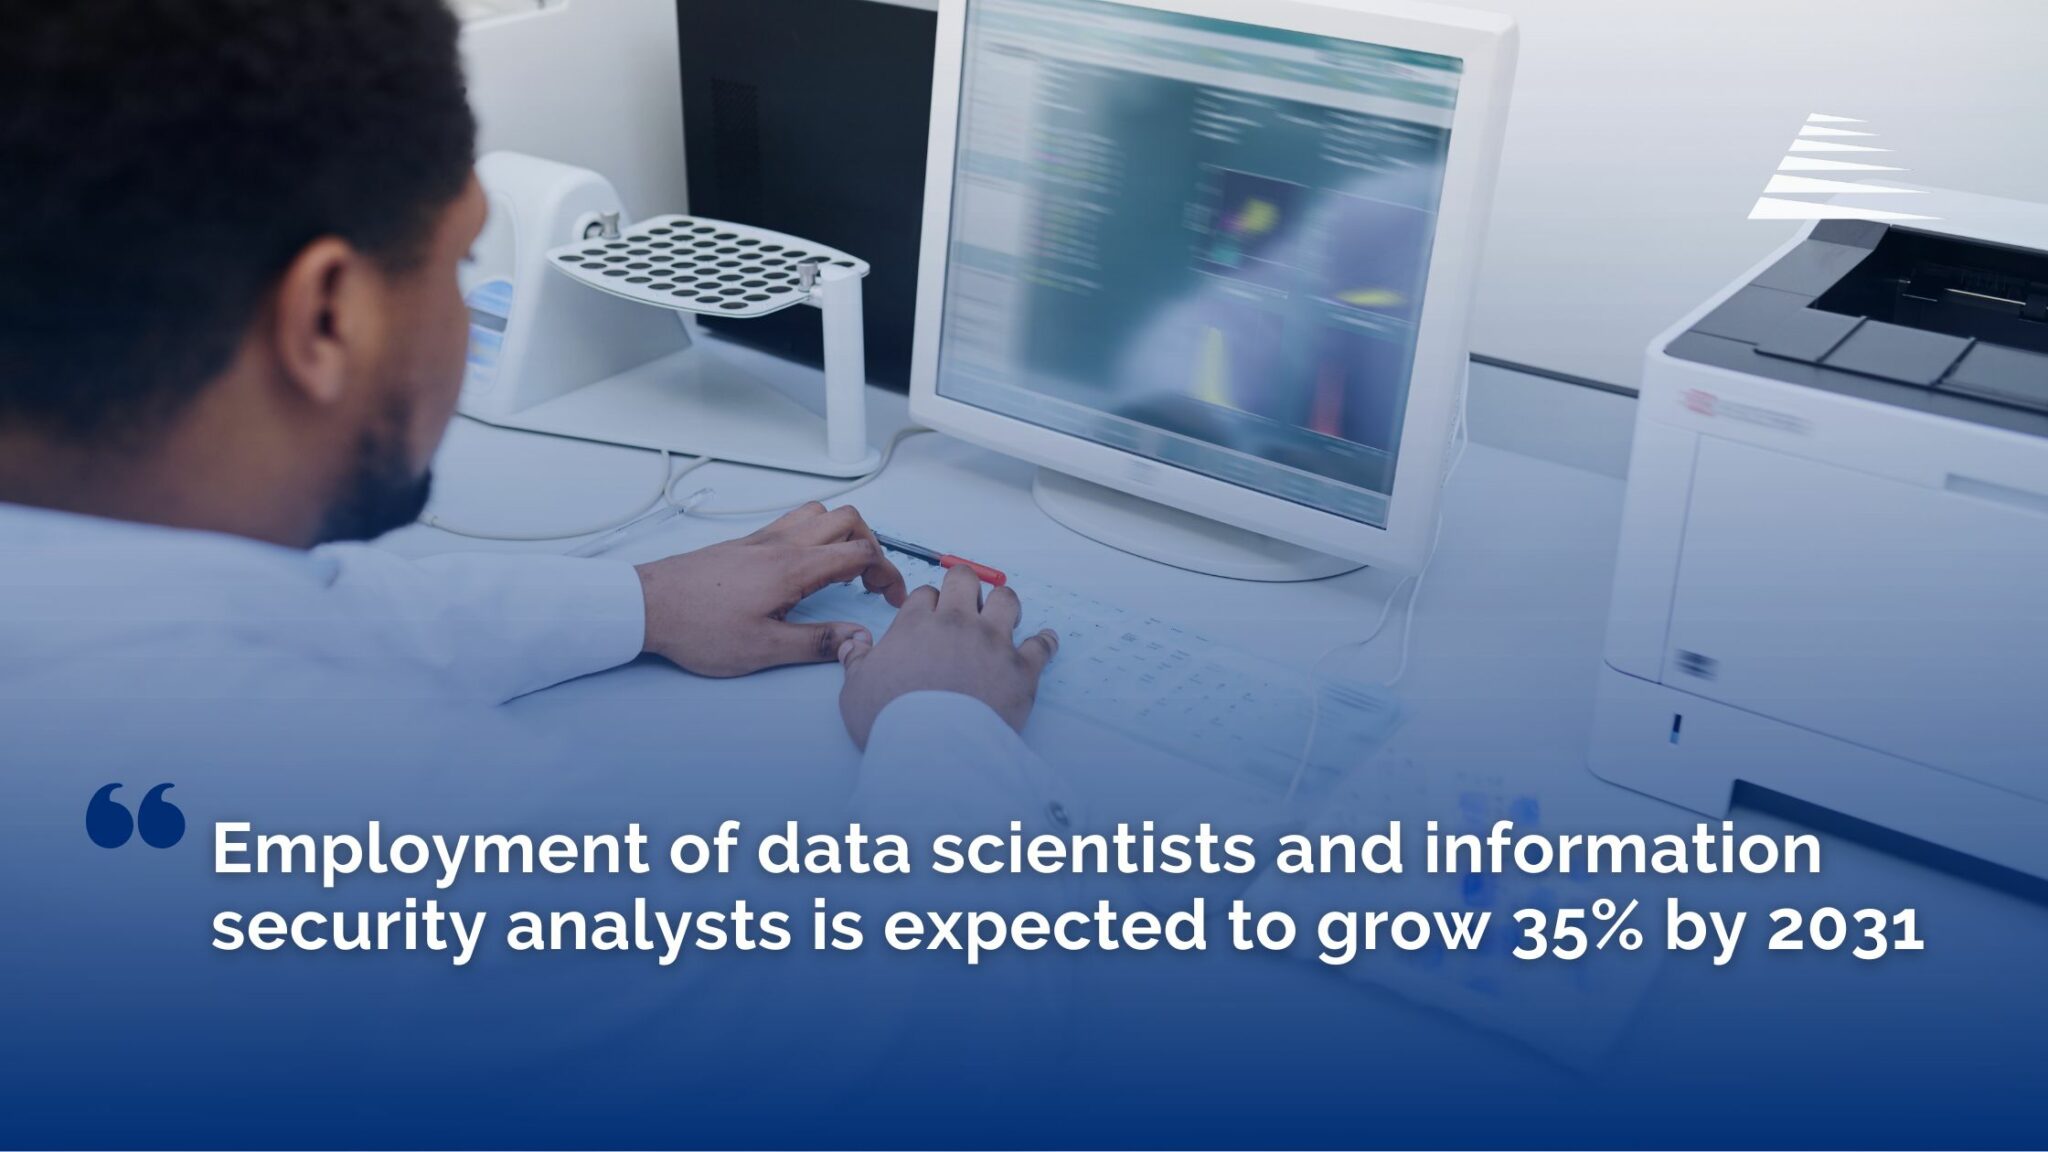 employment of data scientists is expected to grow 36% by 2031, which is much faster than other professions